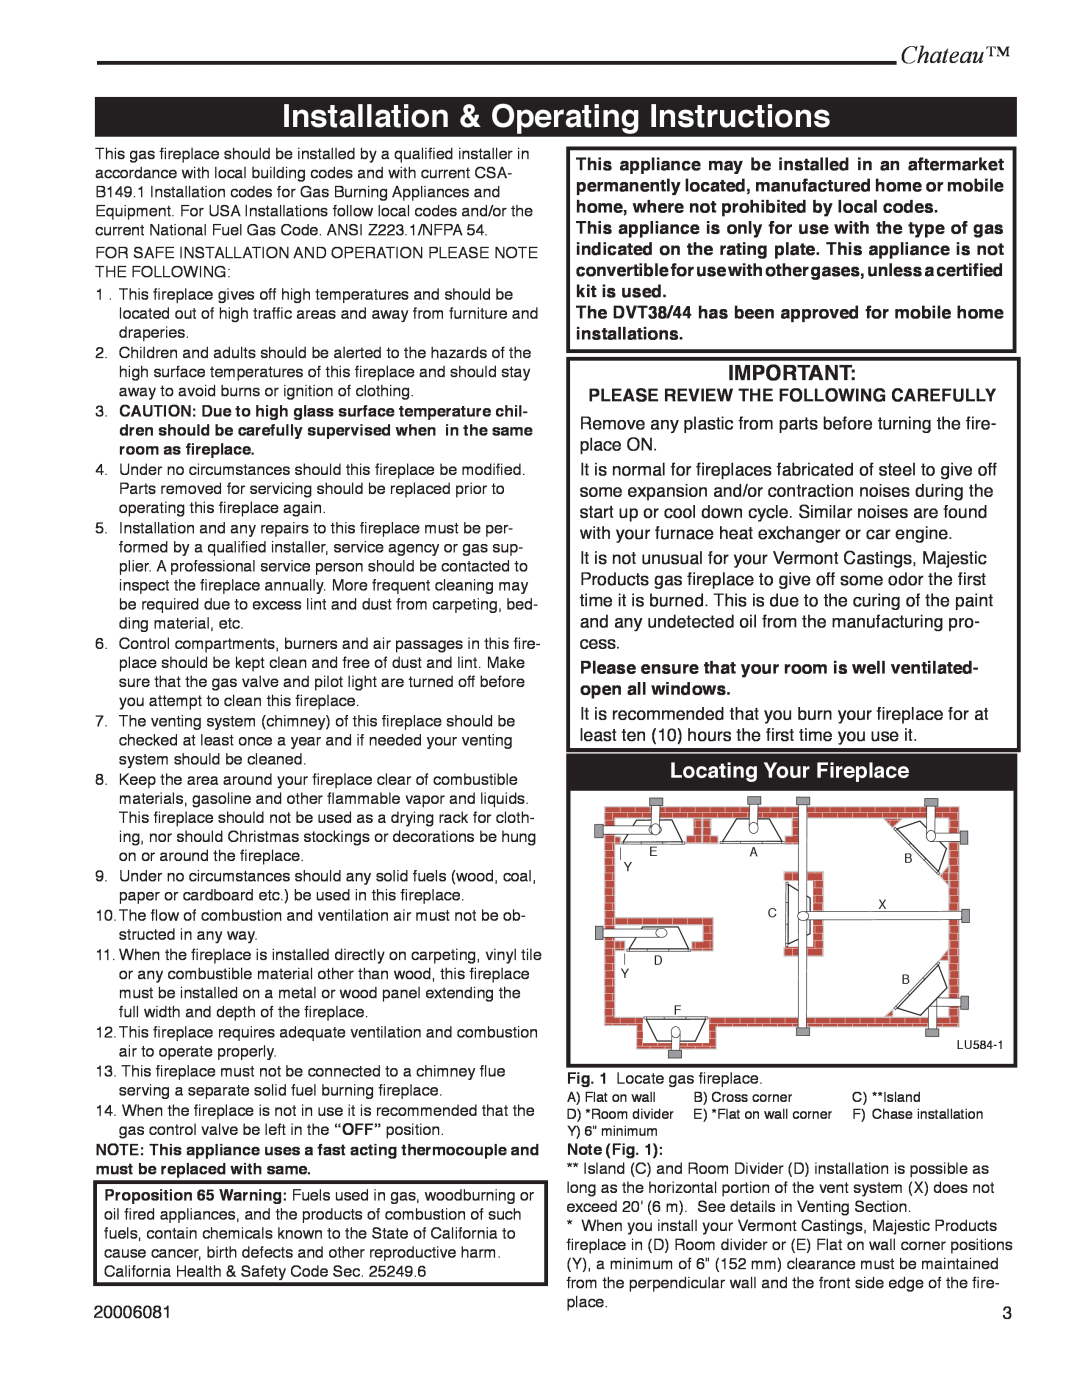 Vermont Casting DVT38 installation instructions Installation & Operating Instructions, Locating Your Fireplace, Chateau 